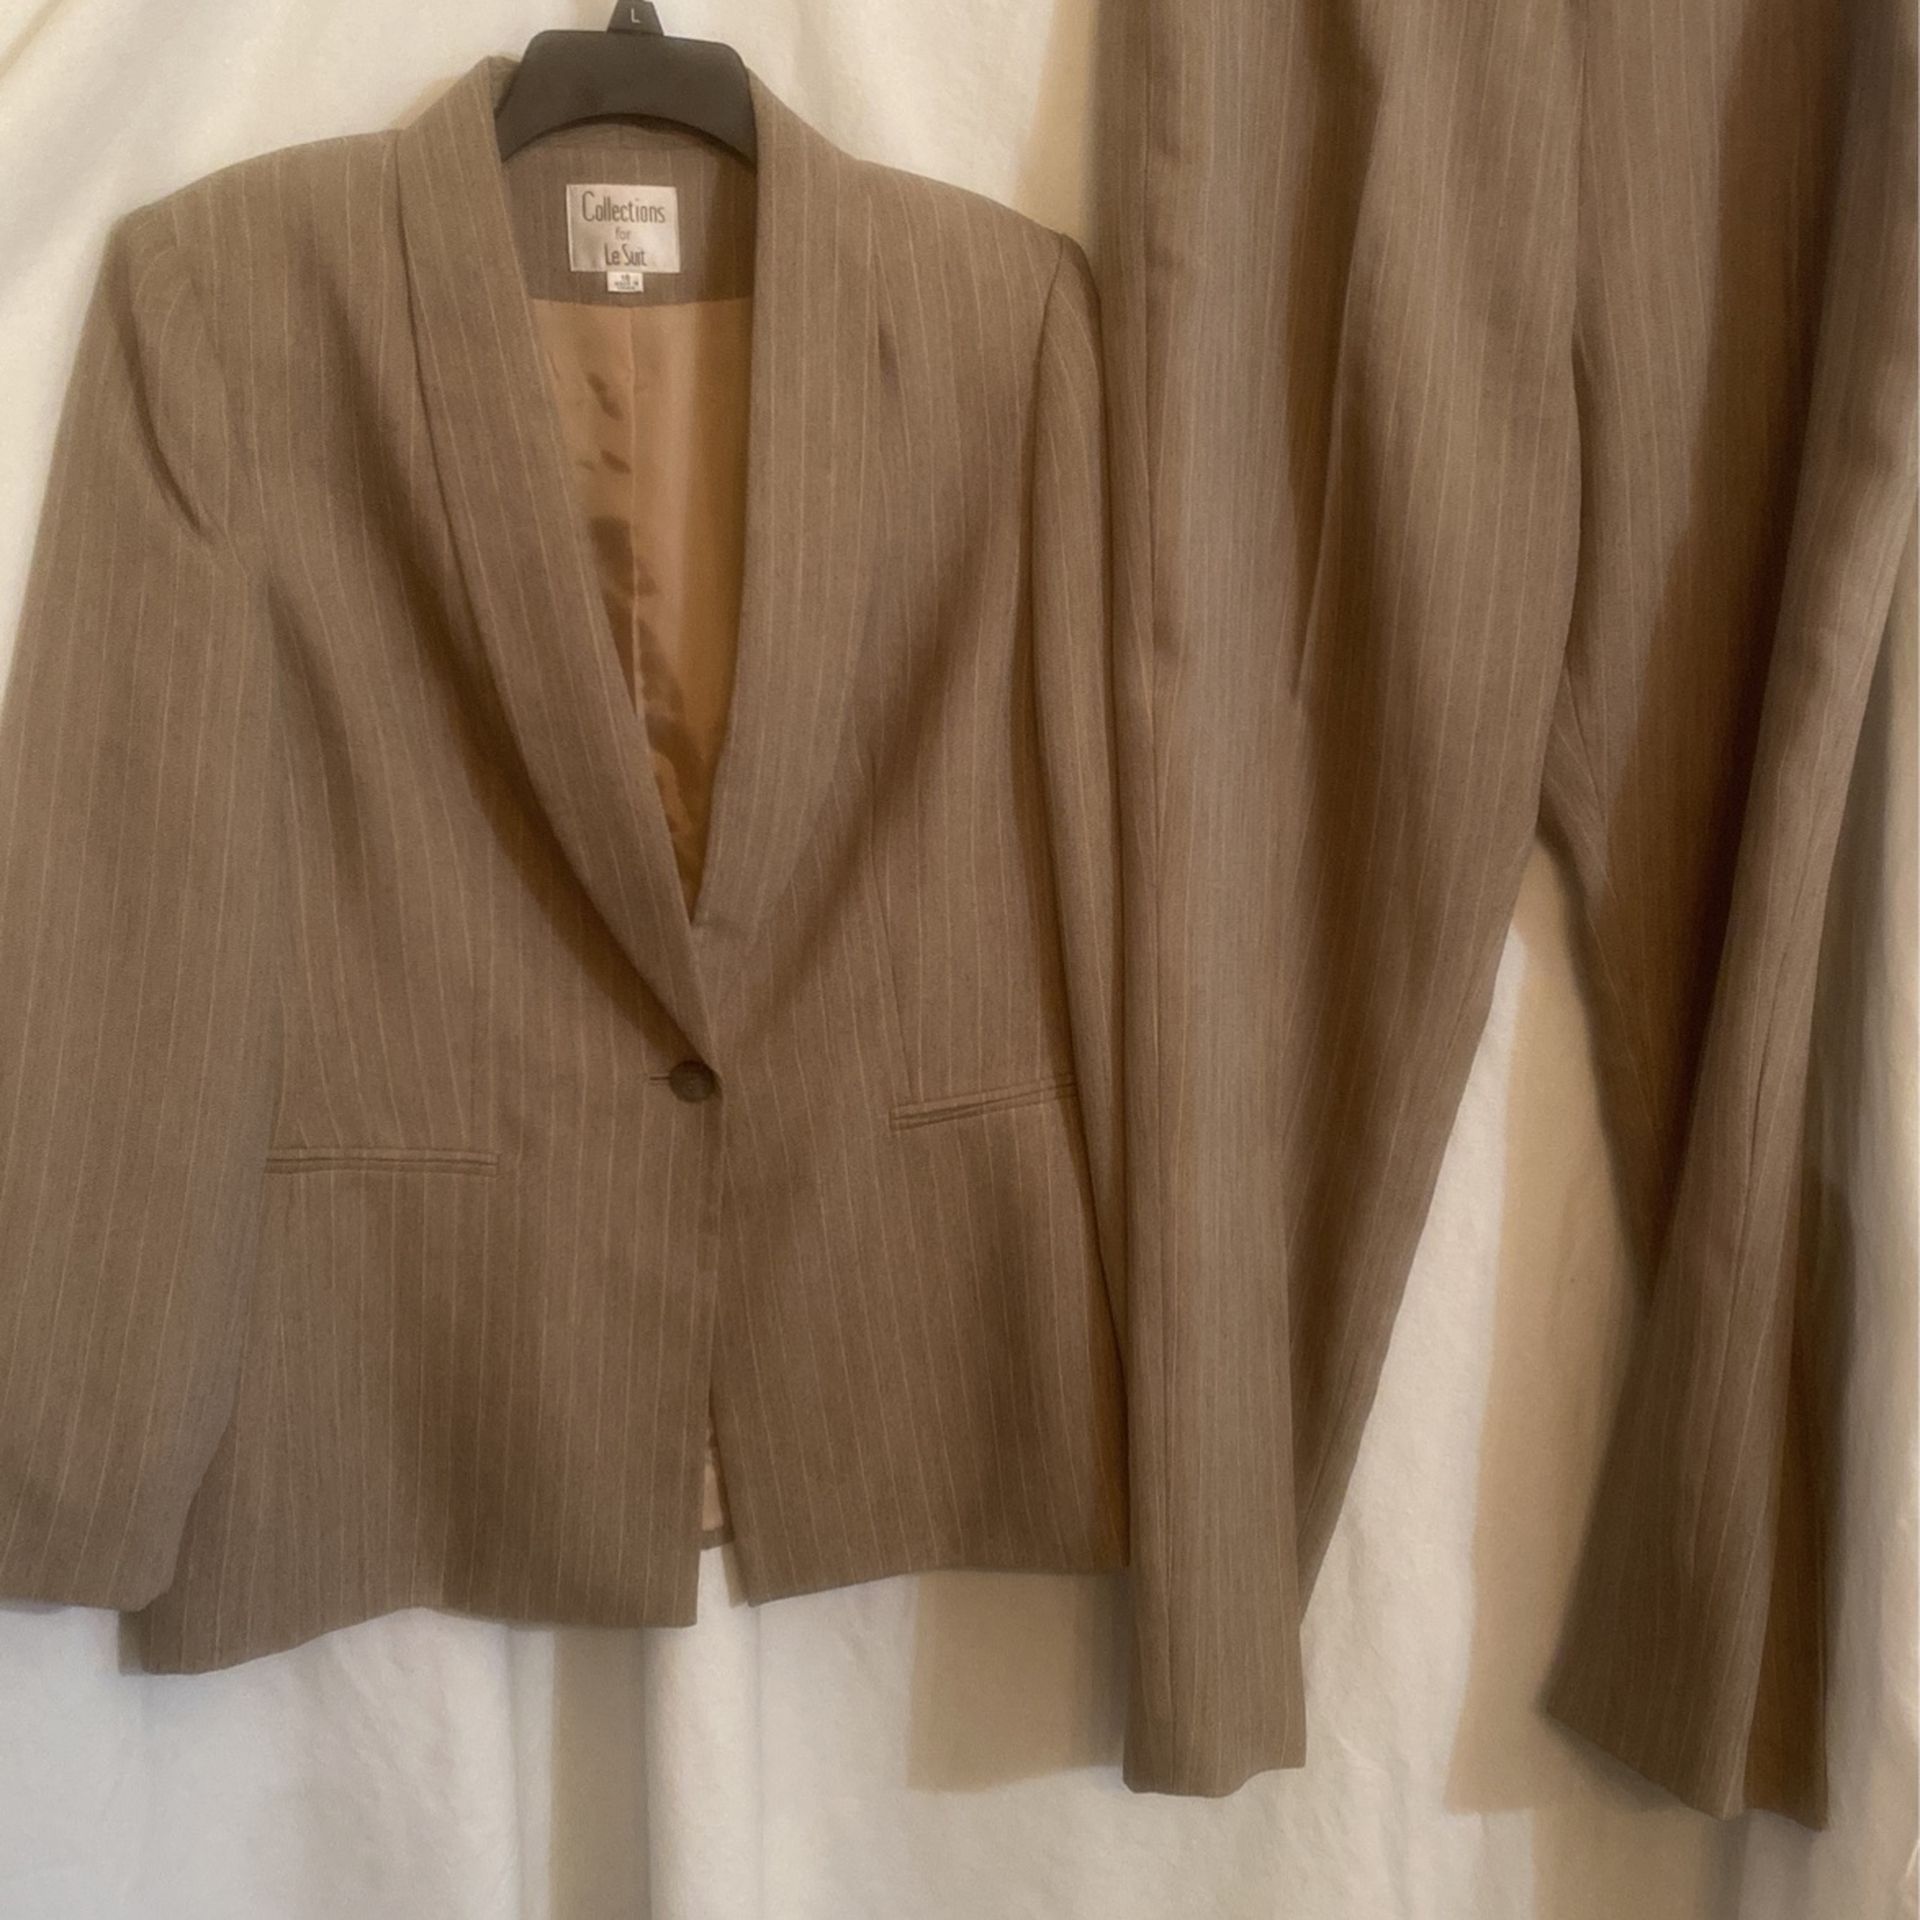 Ladies Pants Suit By Collections For Le Suits Size 16